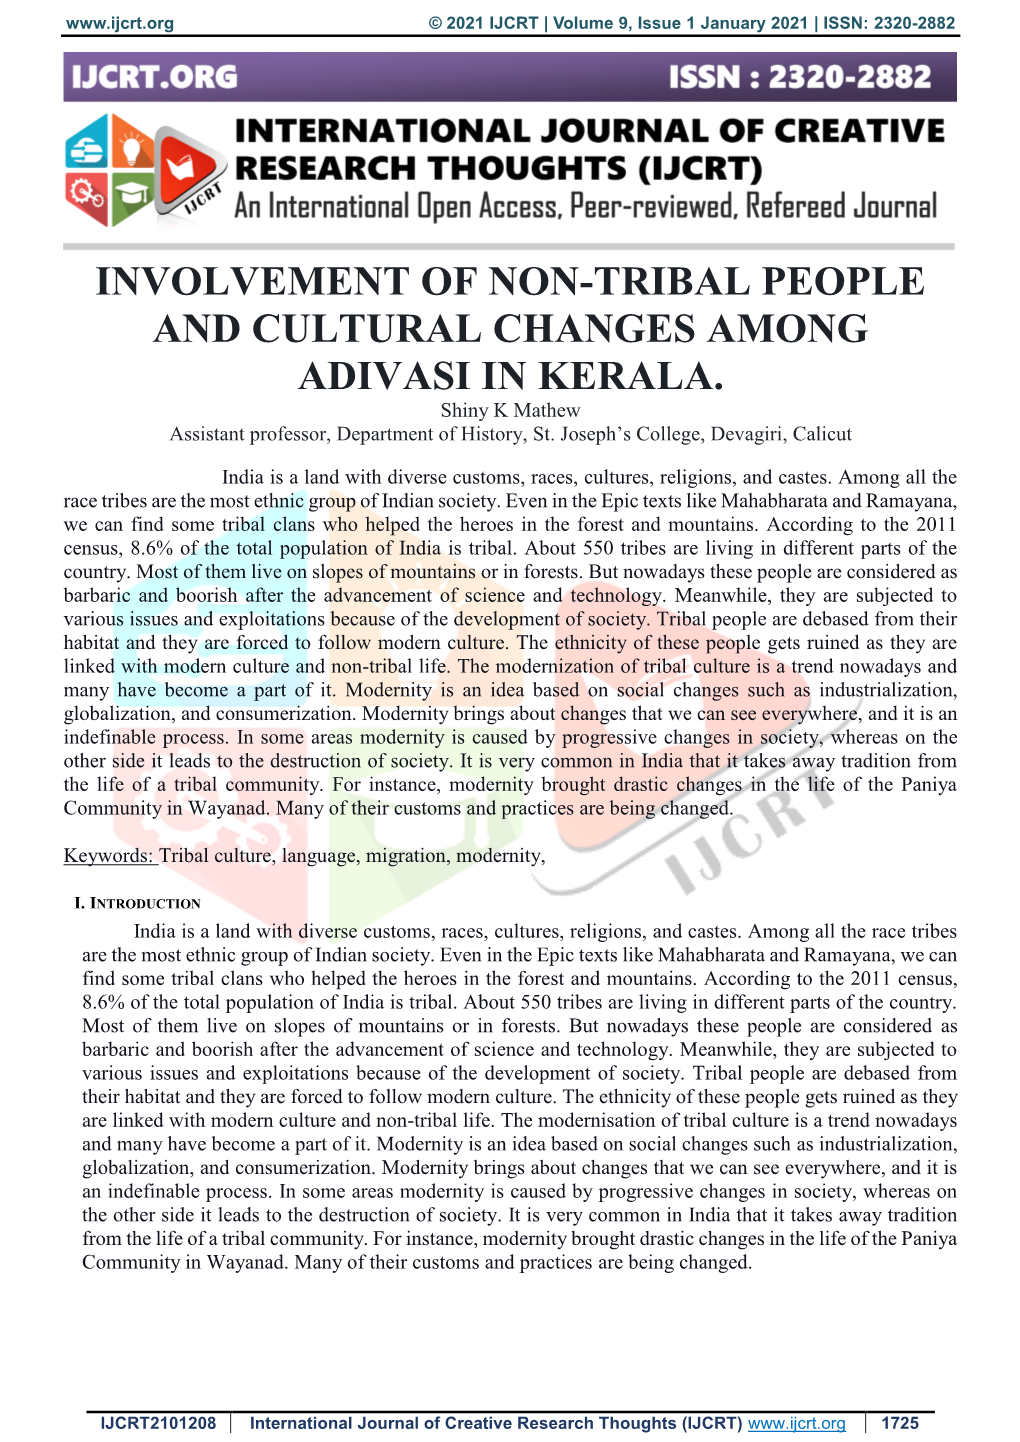 Involvement of Non-Tribal People and Cultural Changes Among Adivasi in Kerala